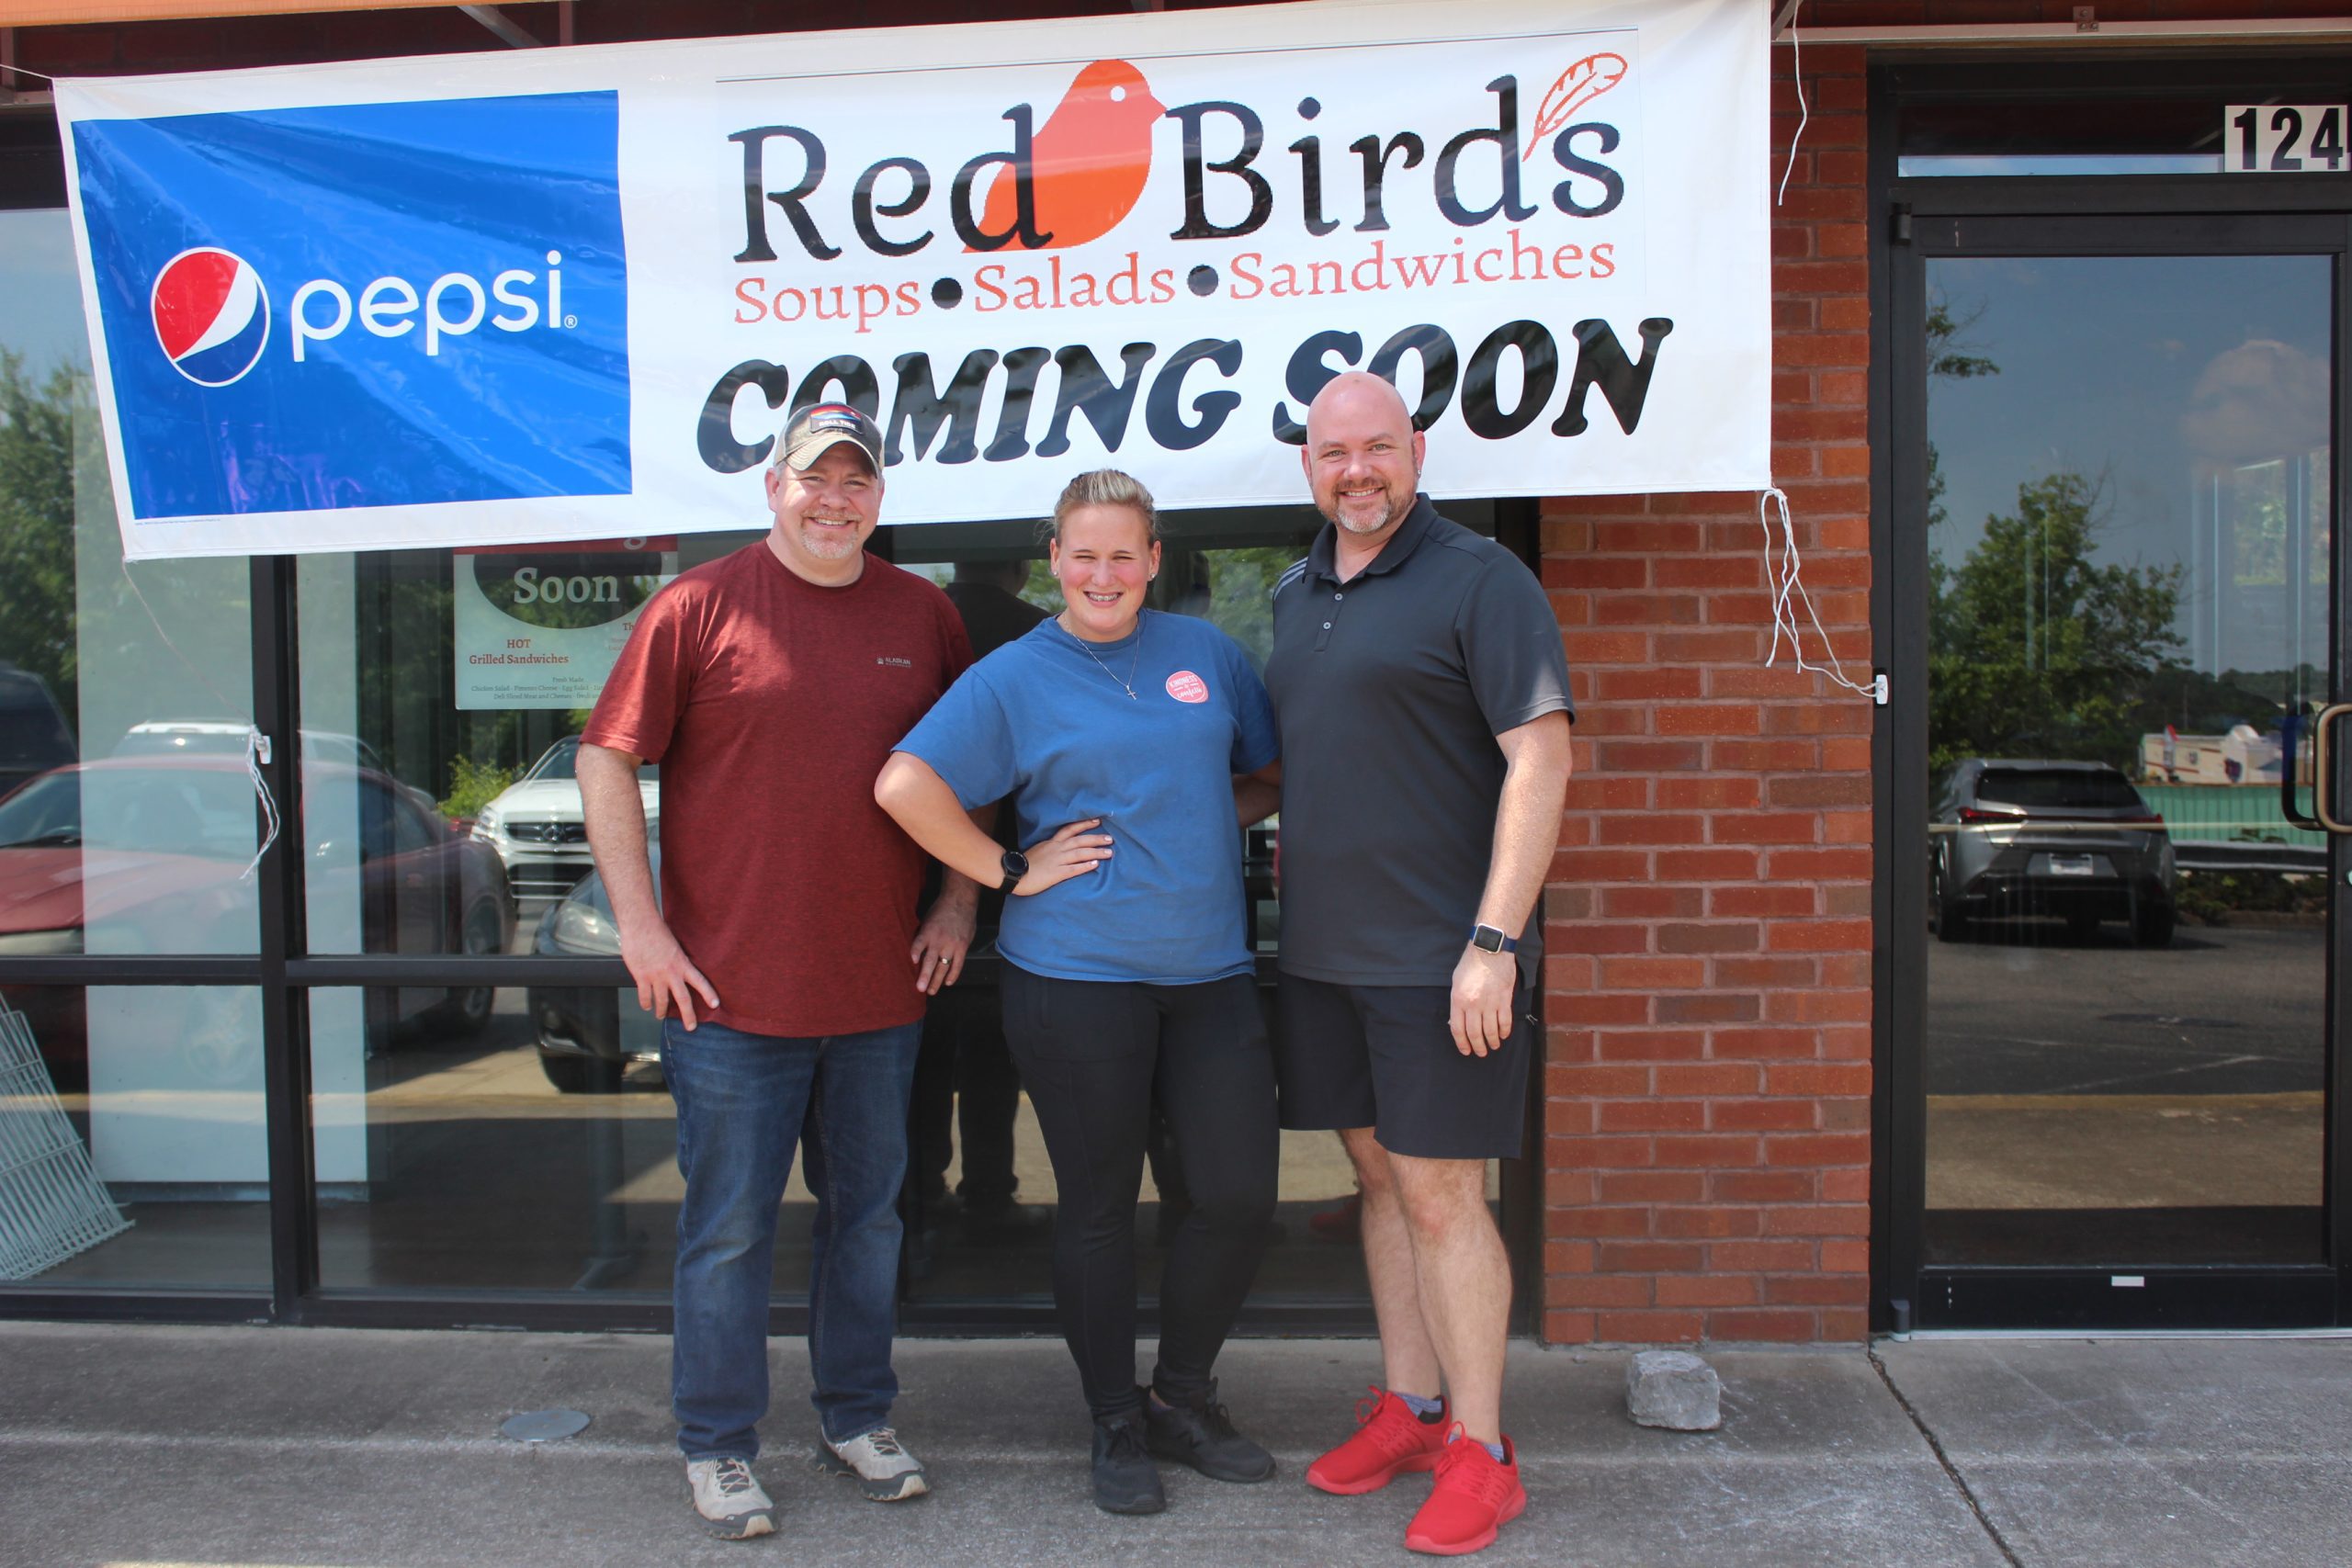 Red Bird's in Trussville, family friendly with food made fresh